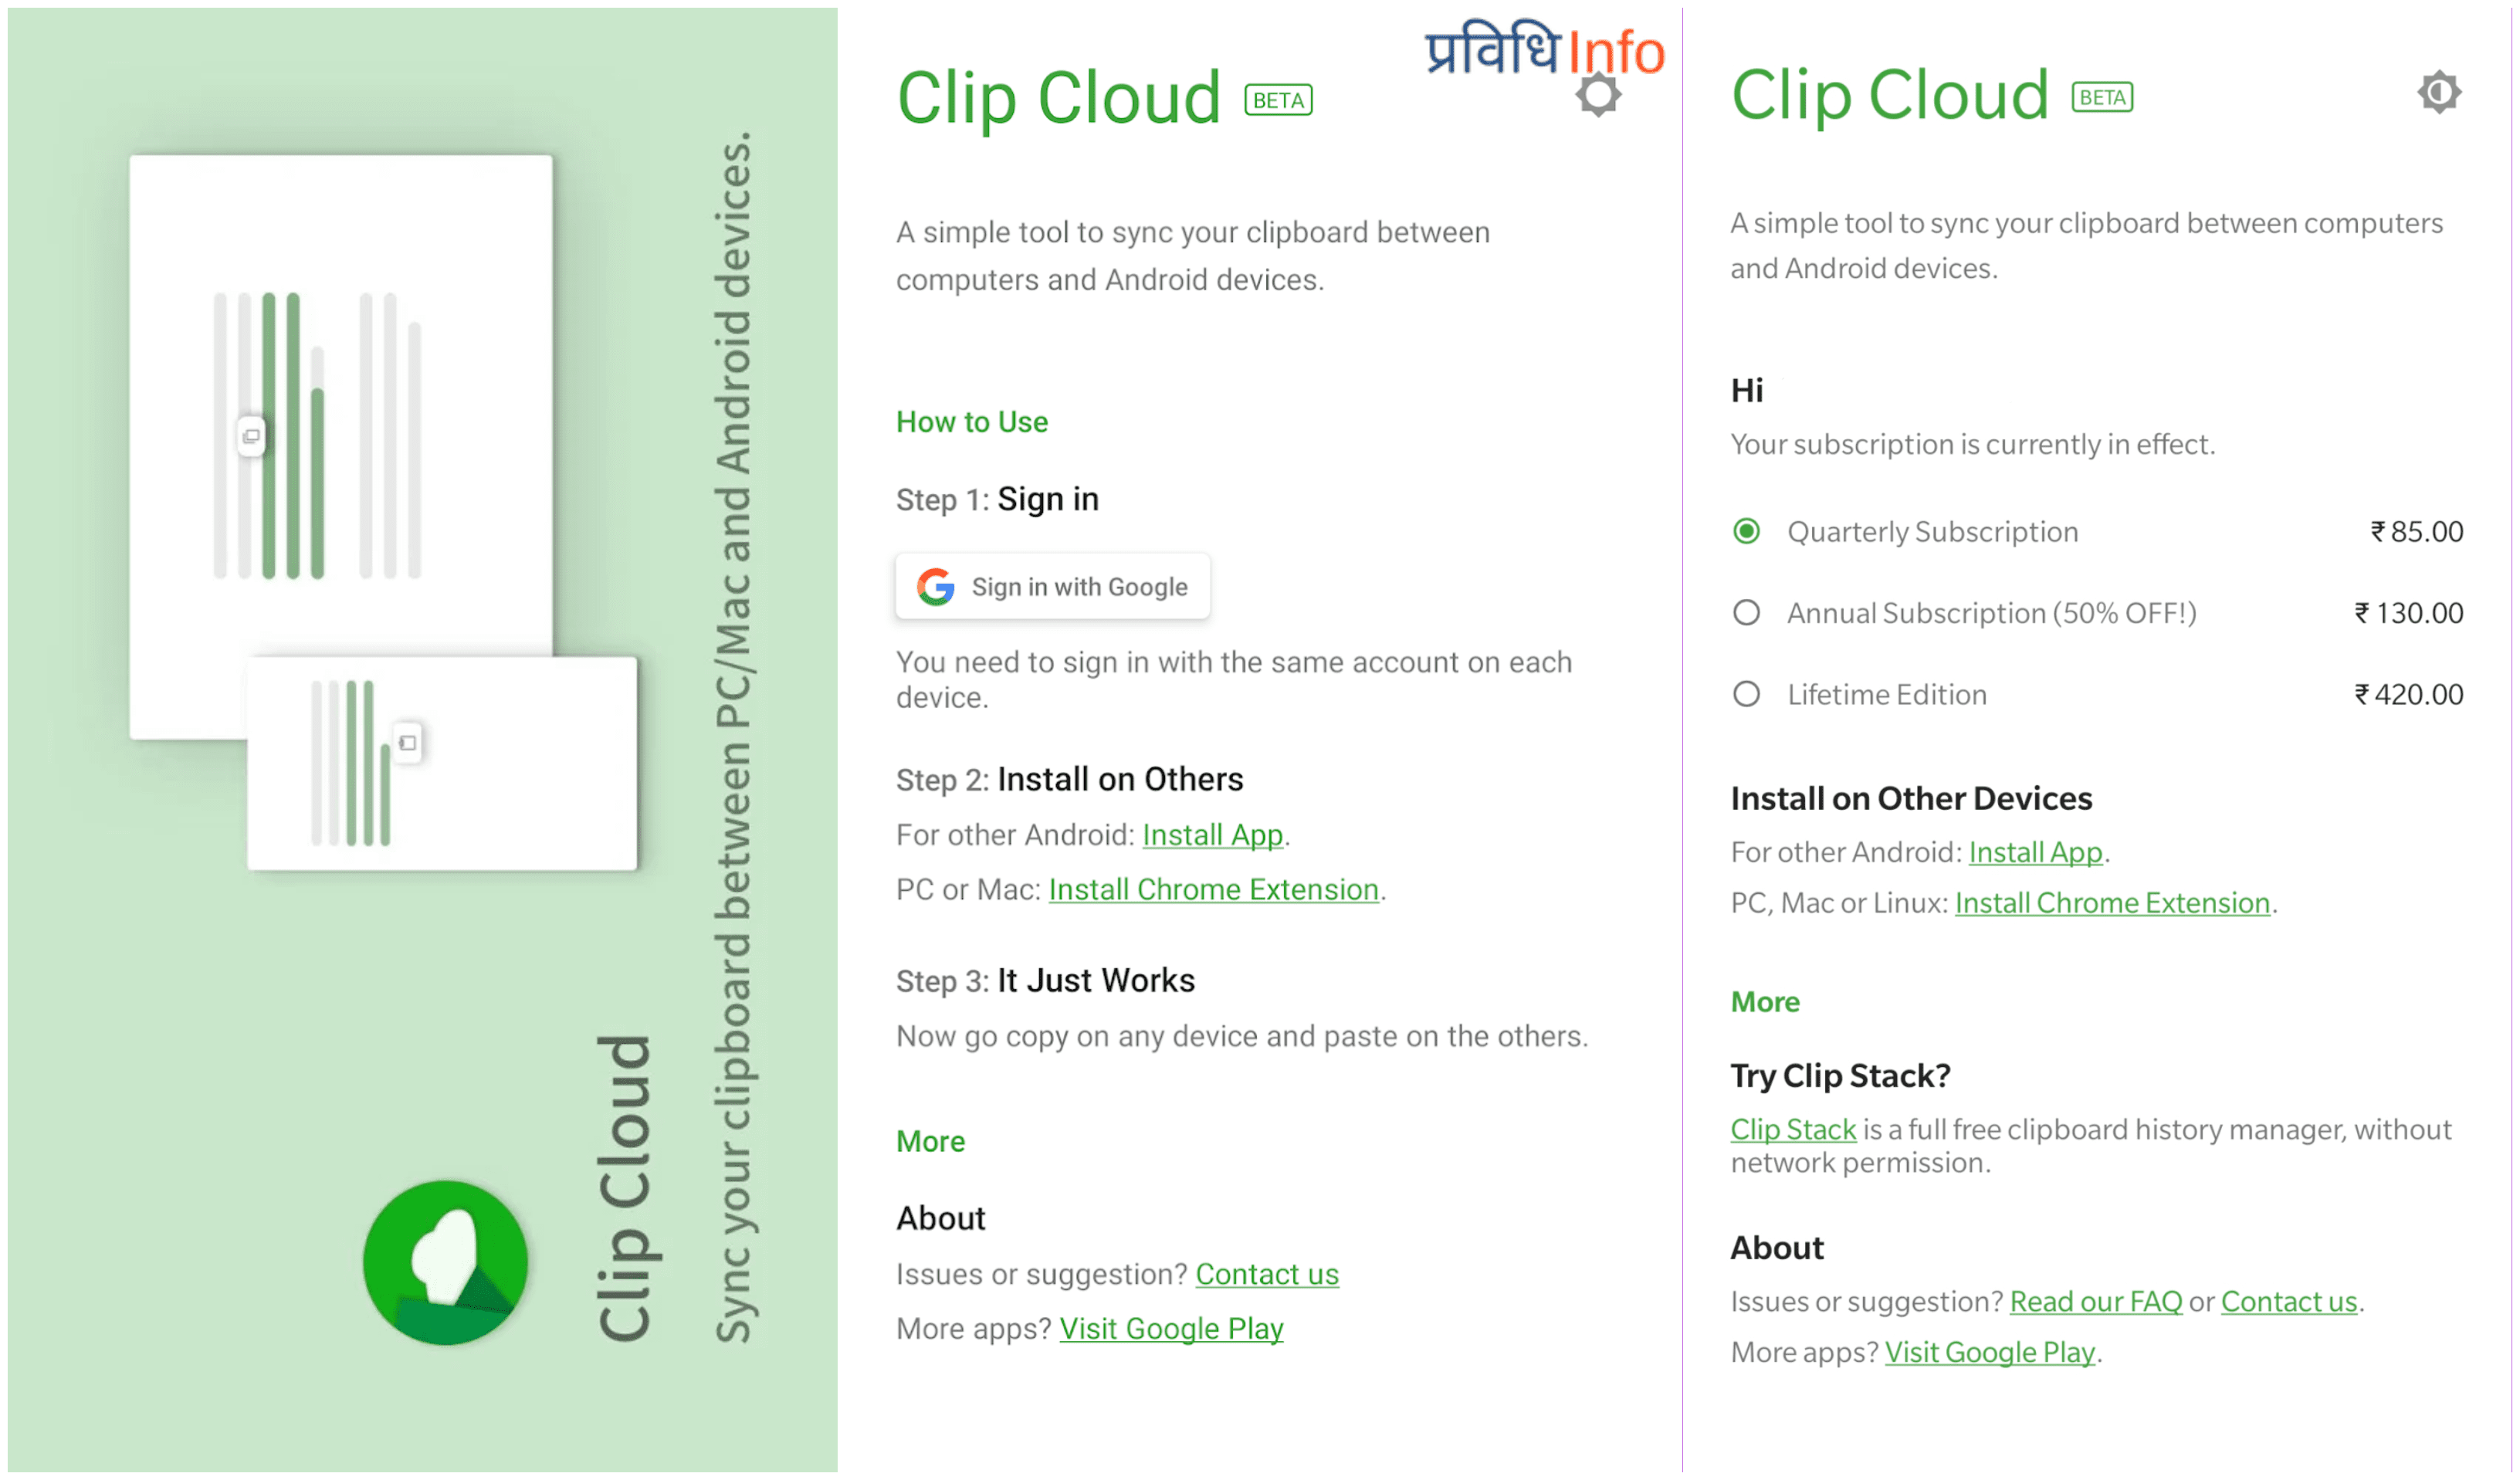 Clip Cloud - Top 10 Unique & Best Free Android Apps – February 2019